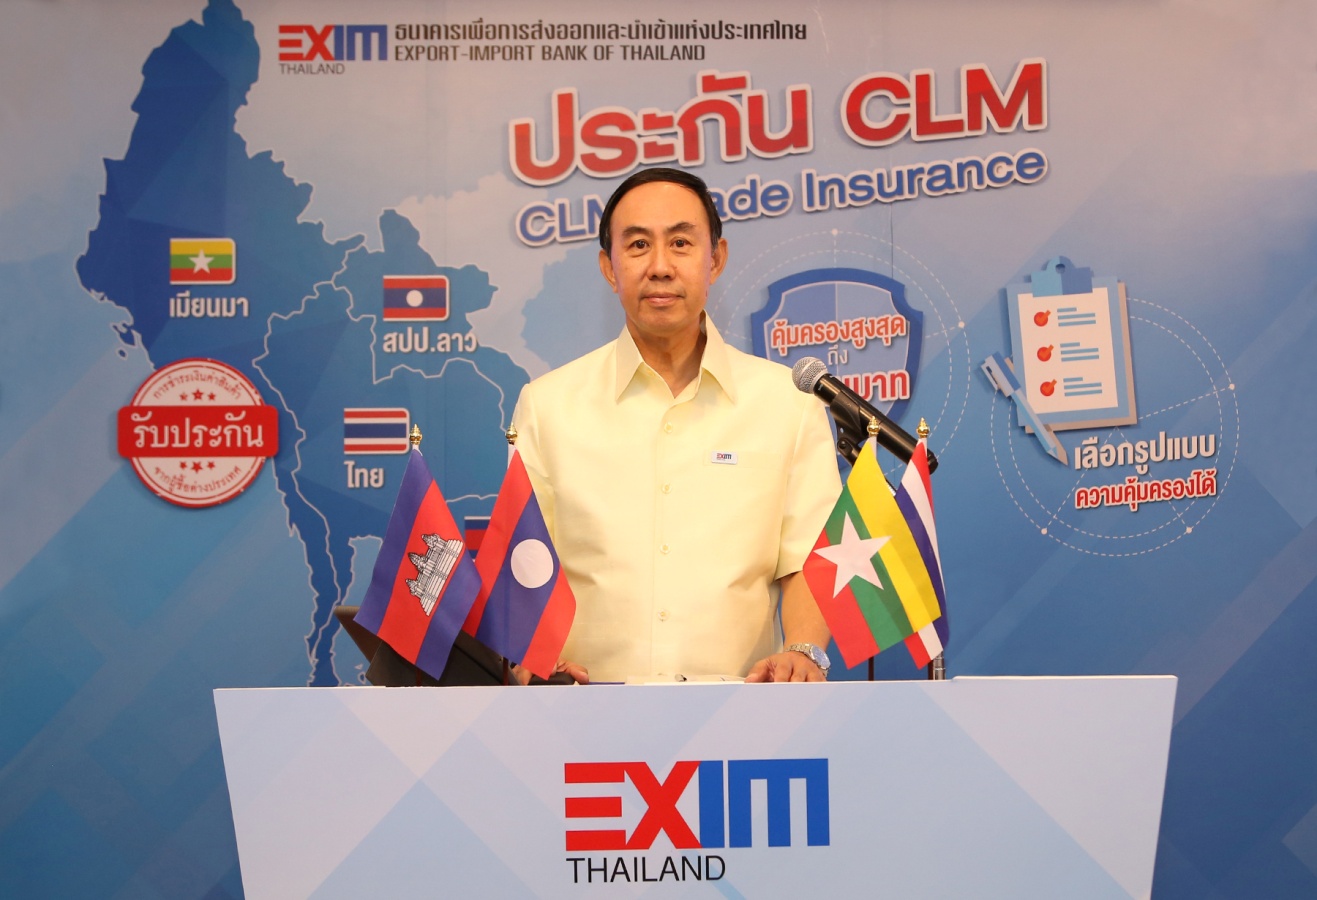 EXIM Thailand Launches “CLM Trade Insurance” to Provide Risk Coverage to Thai Exporters in Cambodia, Lao PDR and Myanmar